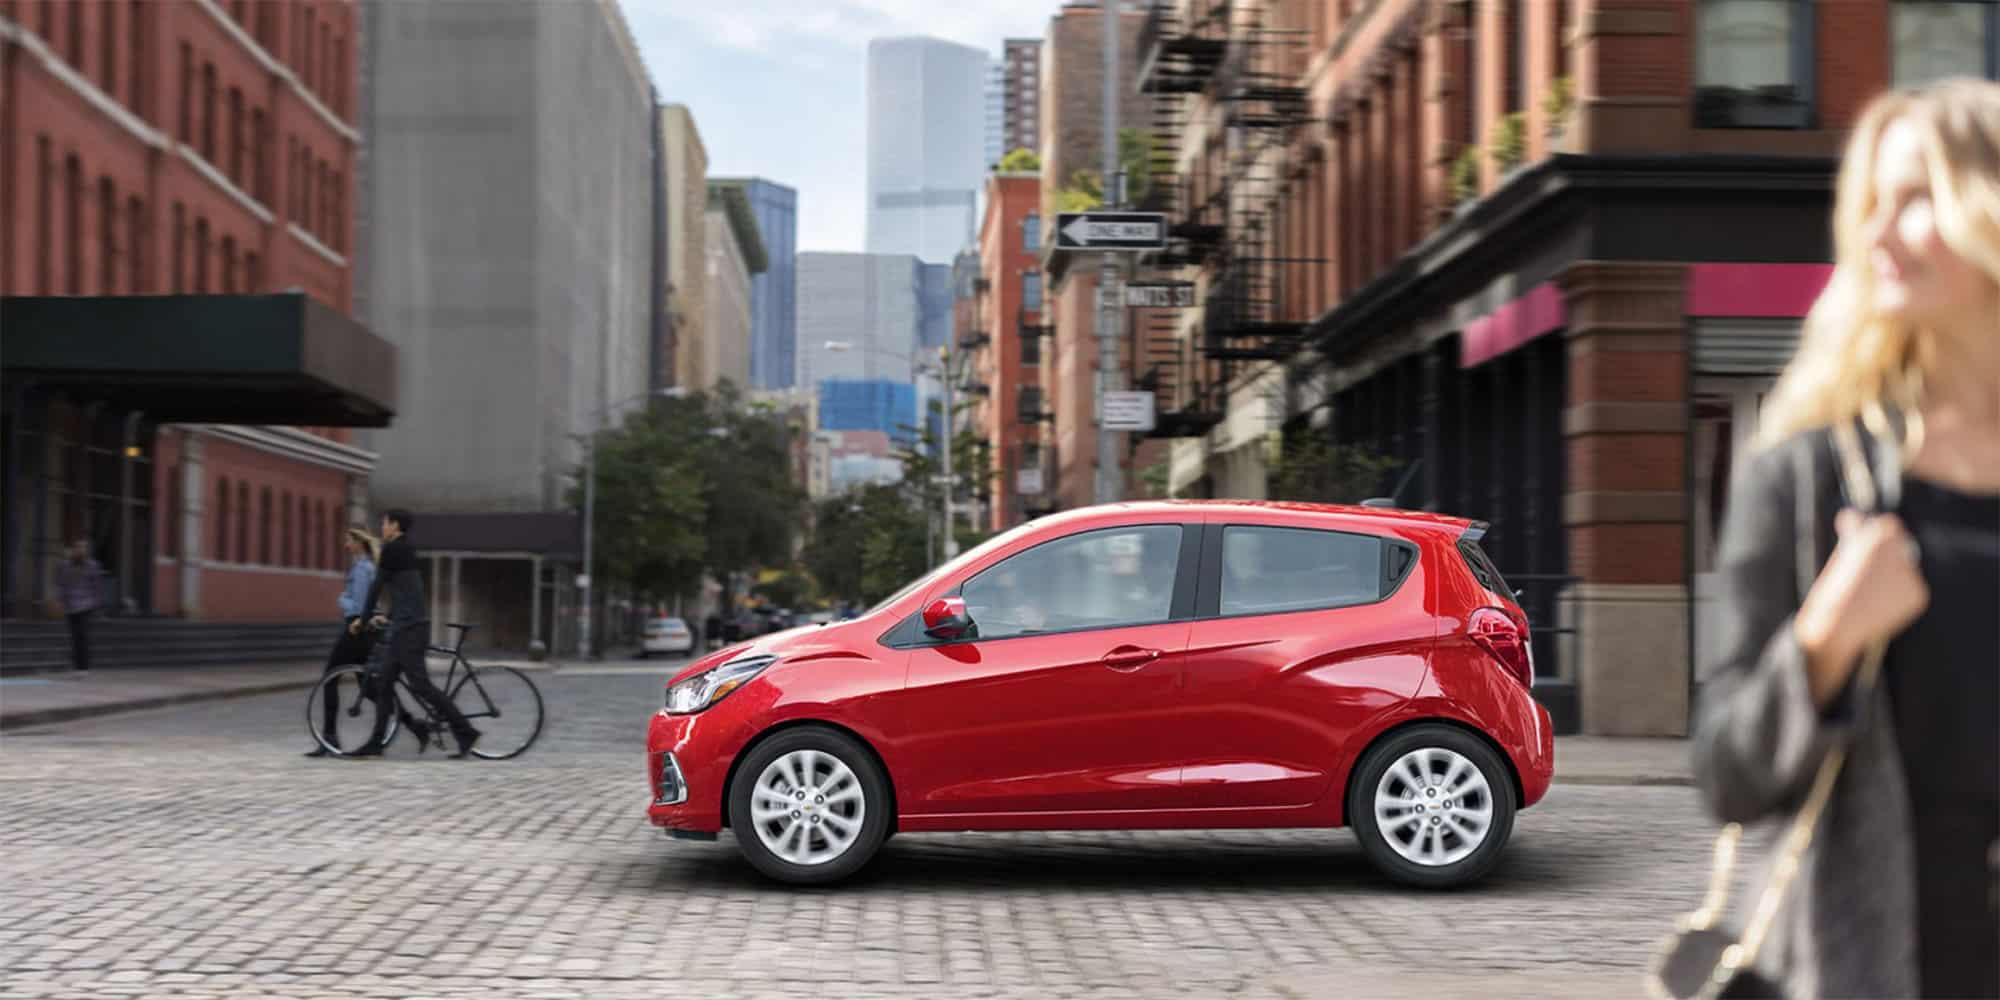 2018 Chevrolet Spark red color on road in city hd wide wallpaper